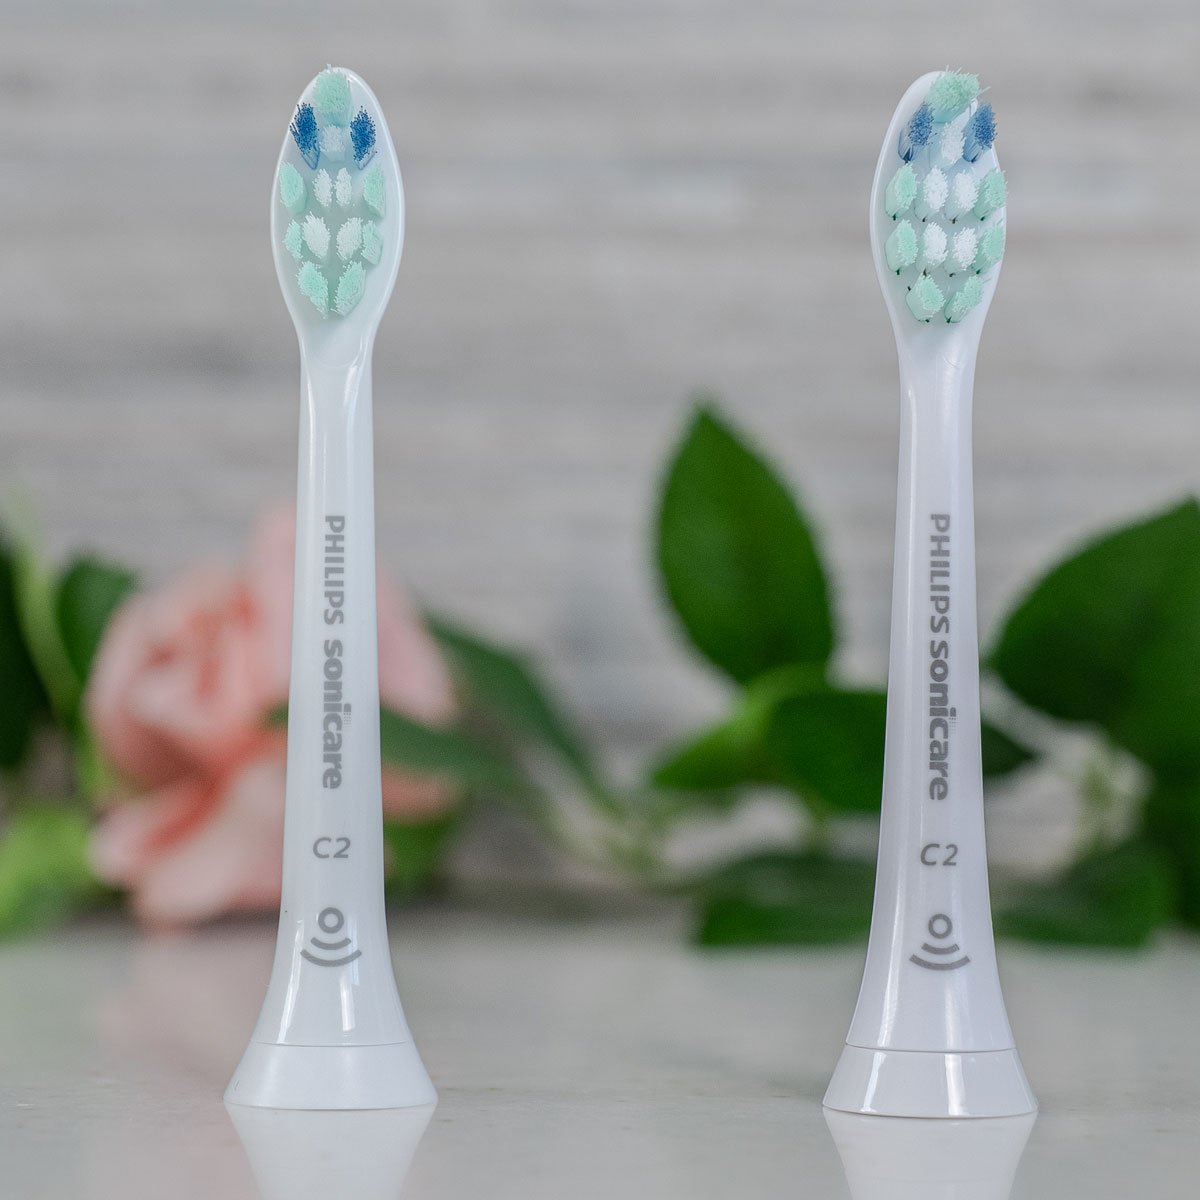 Real vs fake Sonicare brush head looking at the brush from the front.